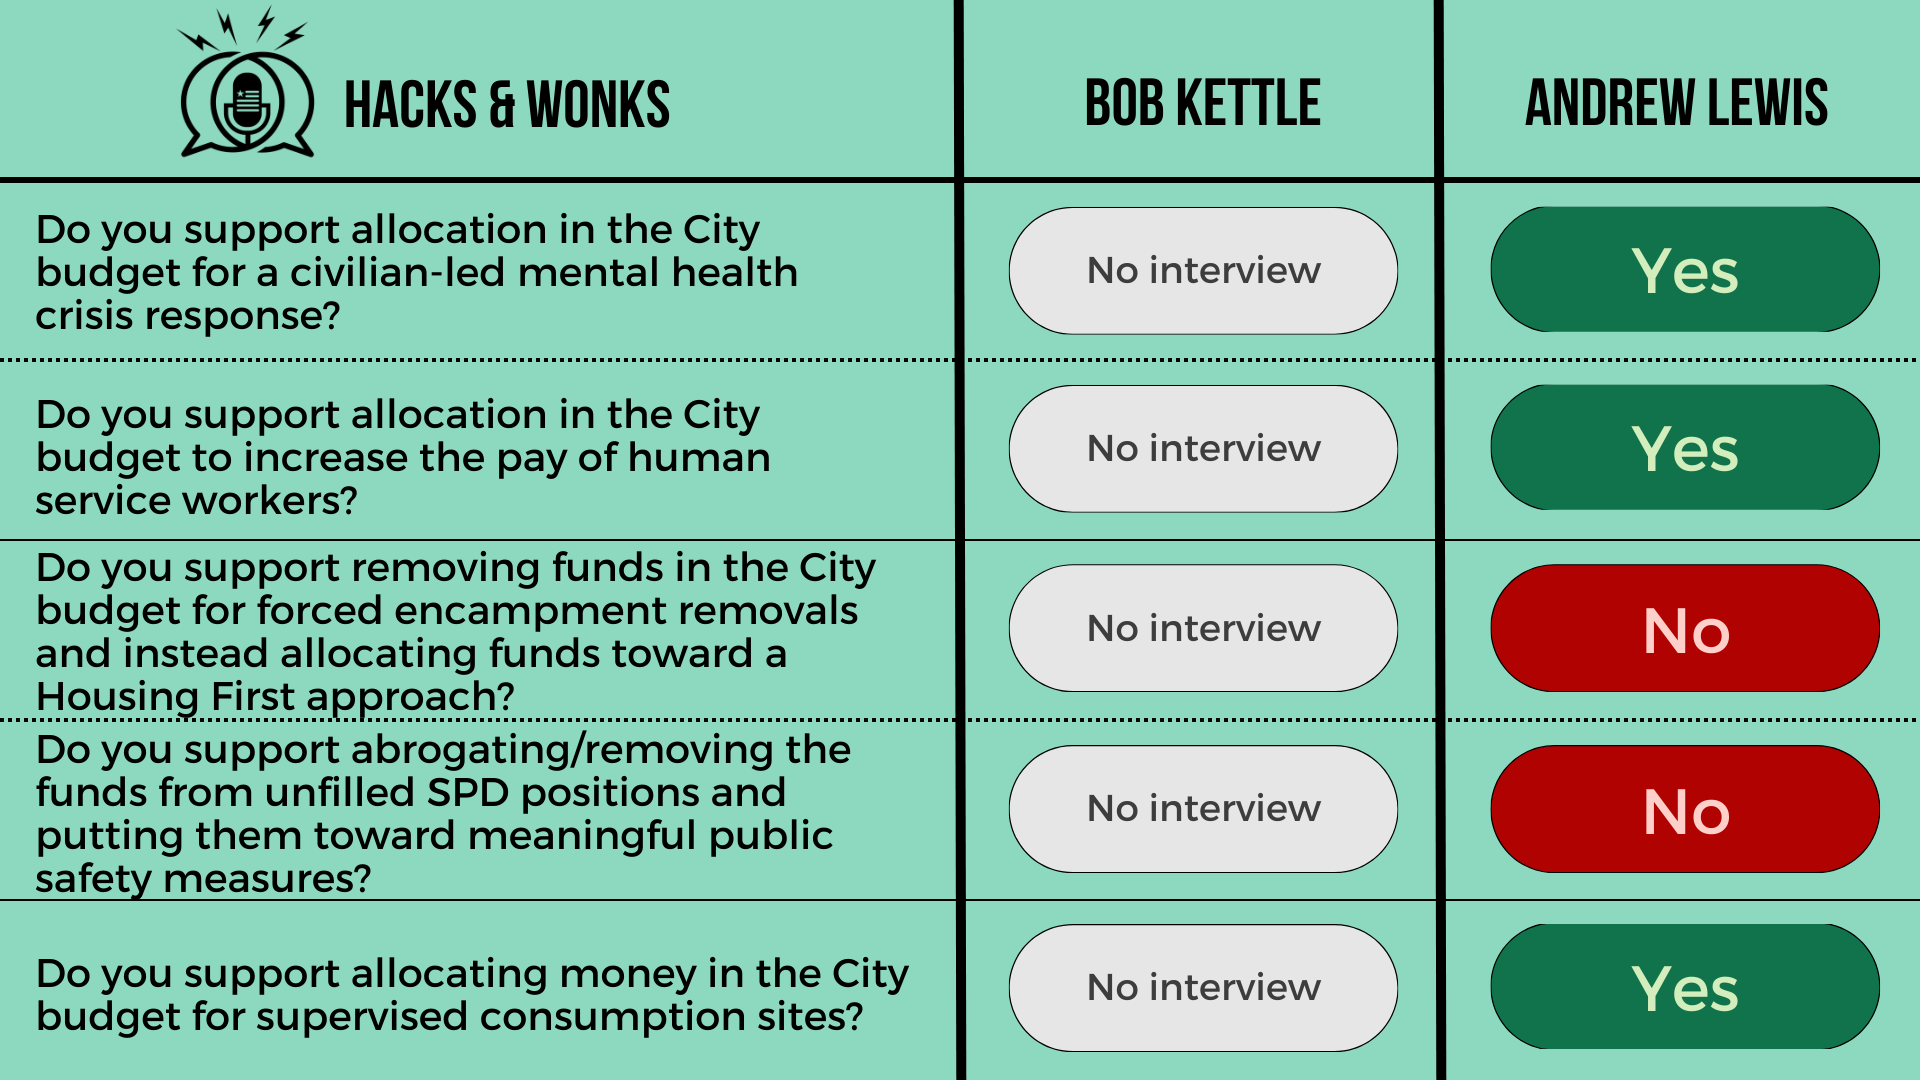 Q: Do you support allocation in the City budget for a civilian-led mental health crisis response? Bob Kettle: No interview, Andrew Lewis: Yes  Q: Do you support allocation in the City budget to increase the pay of human service workers? Bob Kettle: N